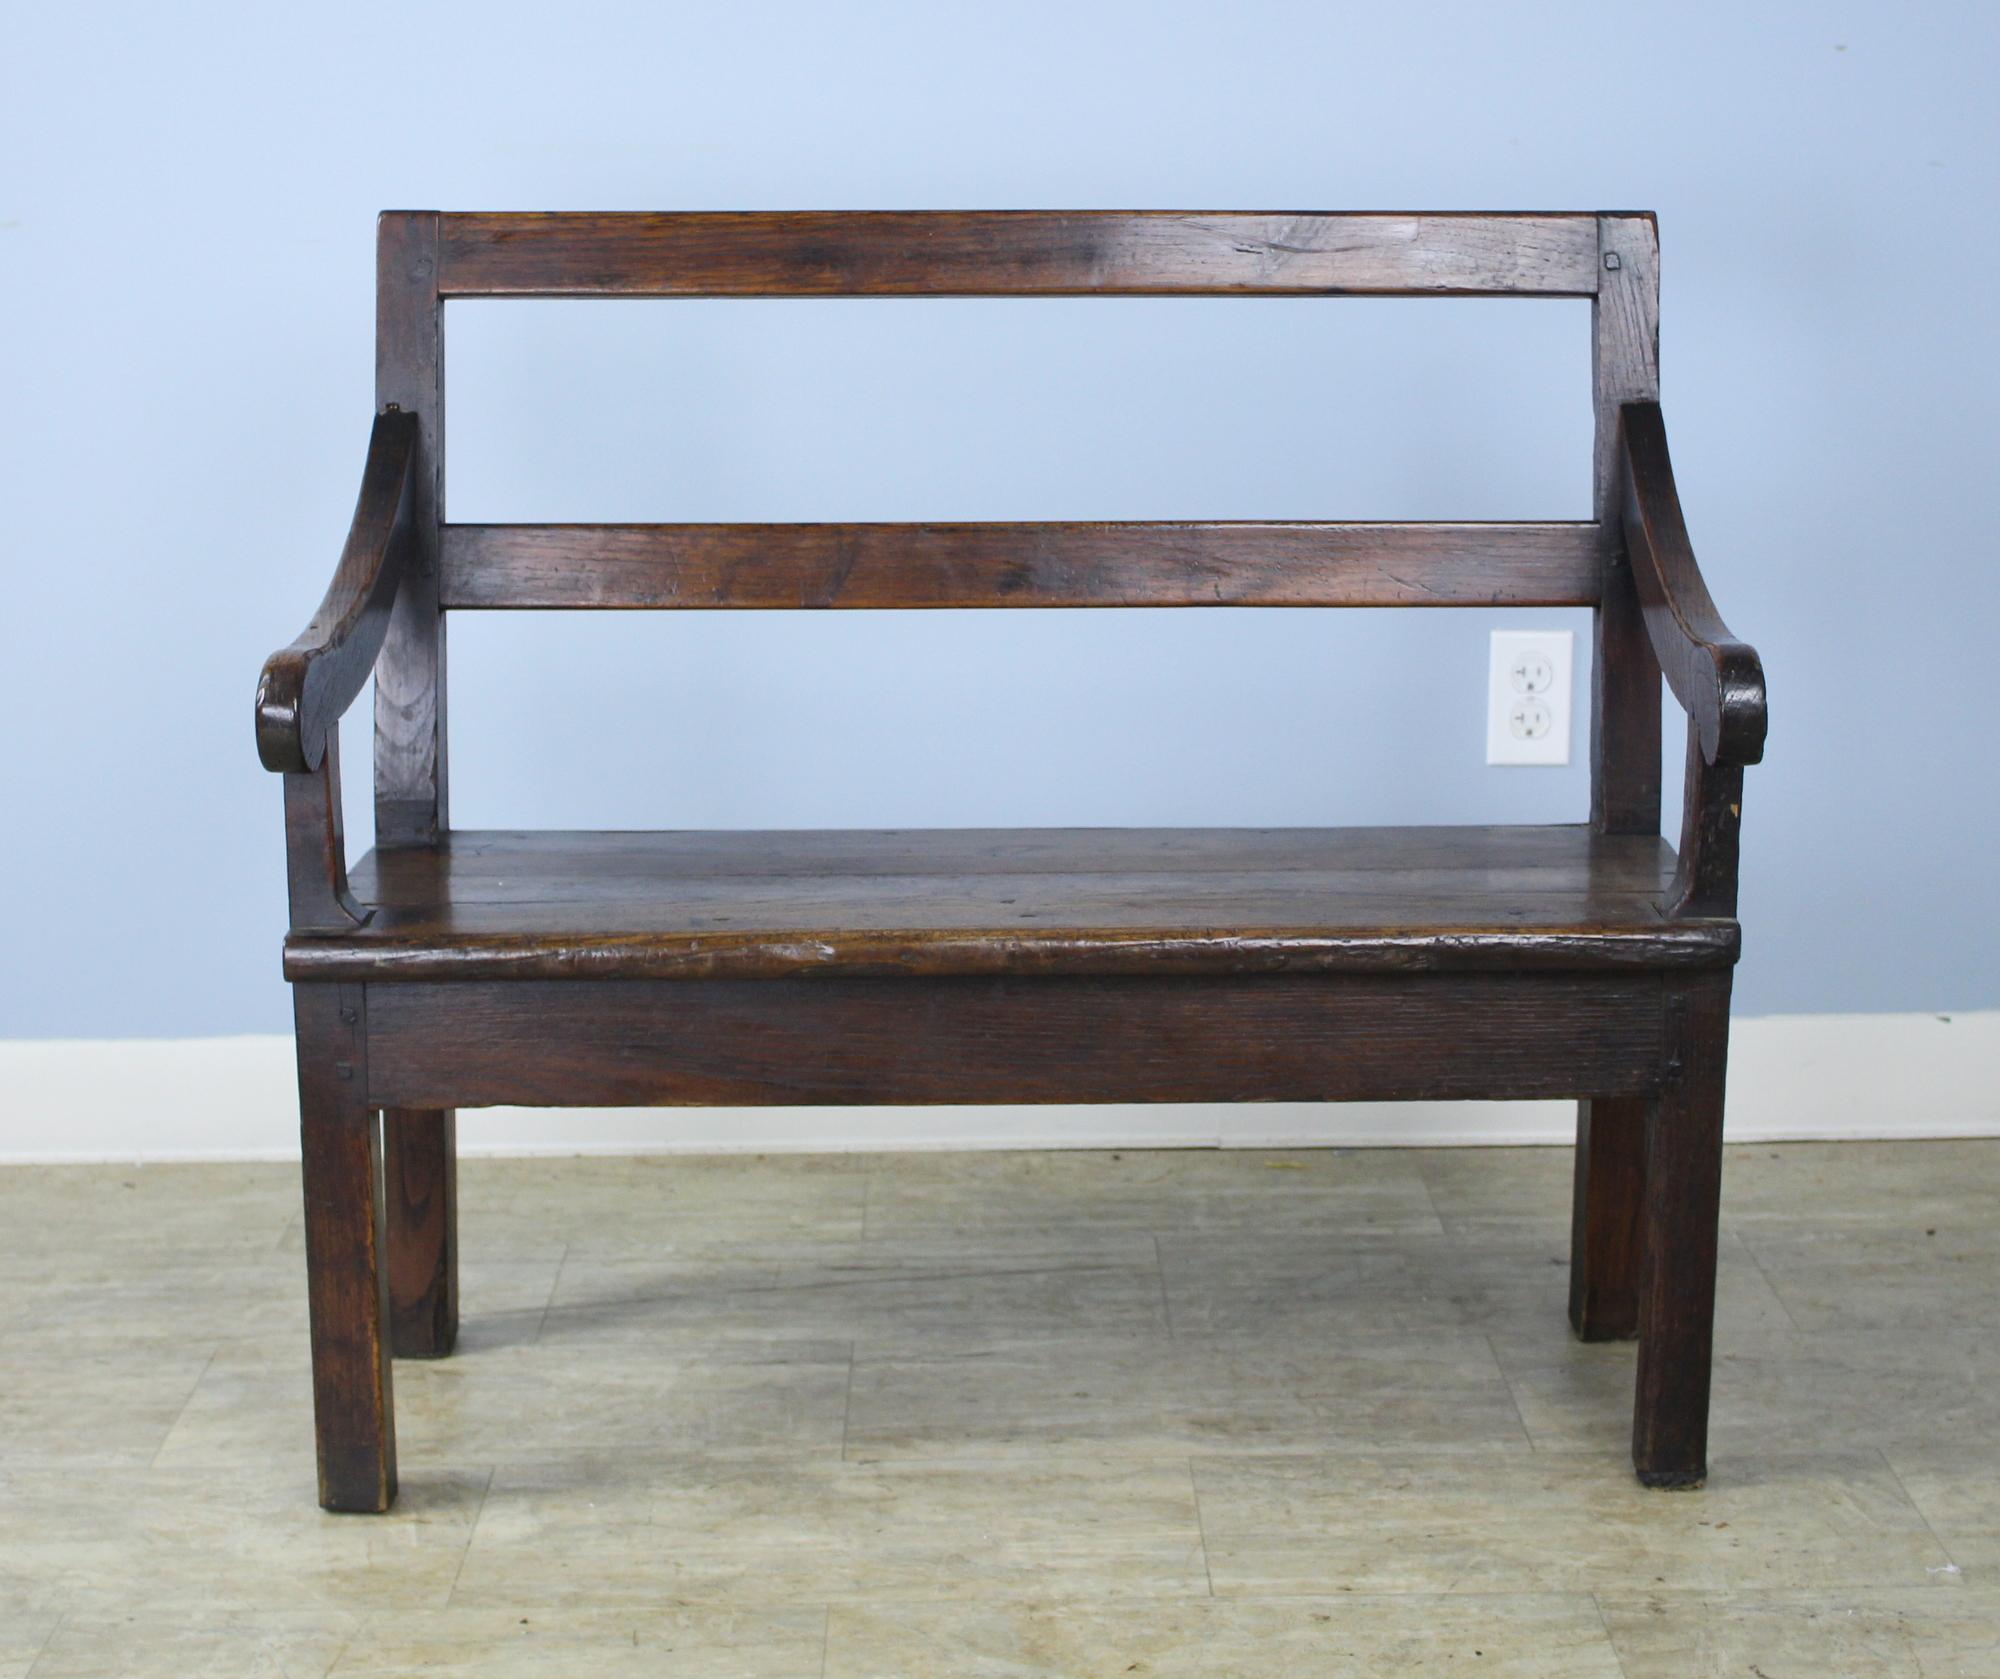 Sweet fireside bench from 19th century, France. Charming rustic look, practical for storage (originally for firewood). Really good chunky look, lovely carved arms.